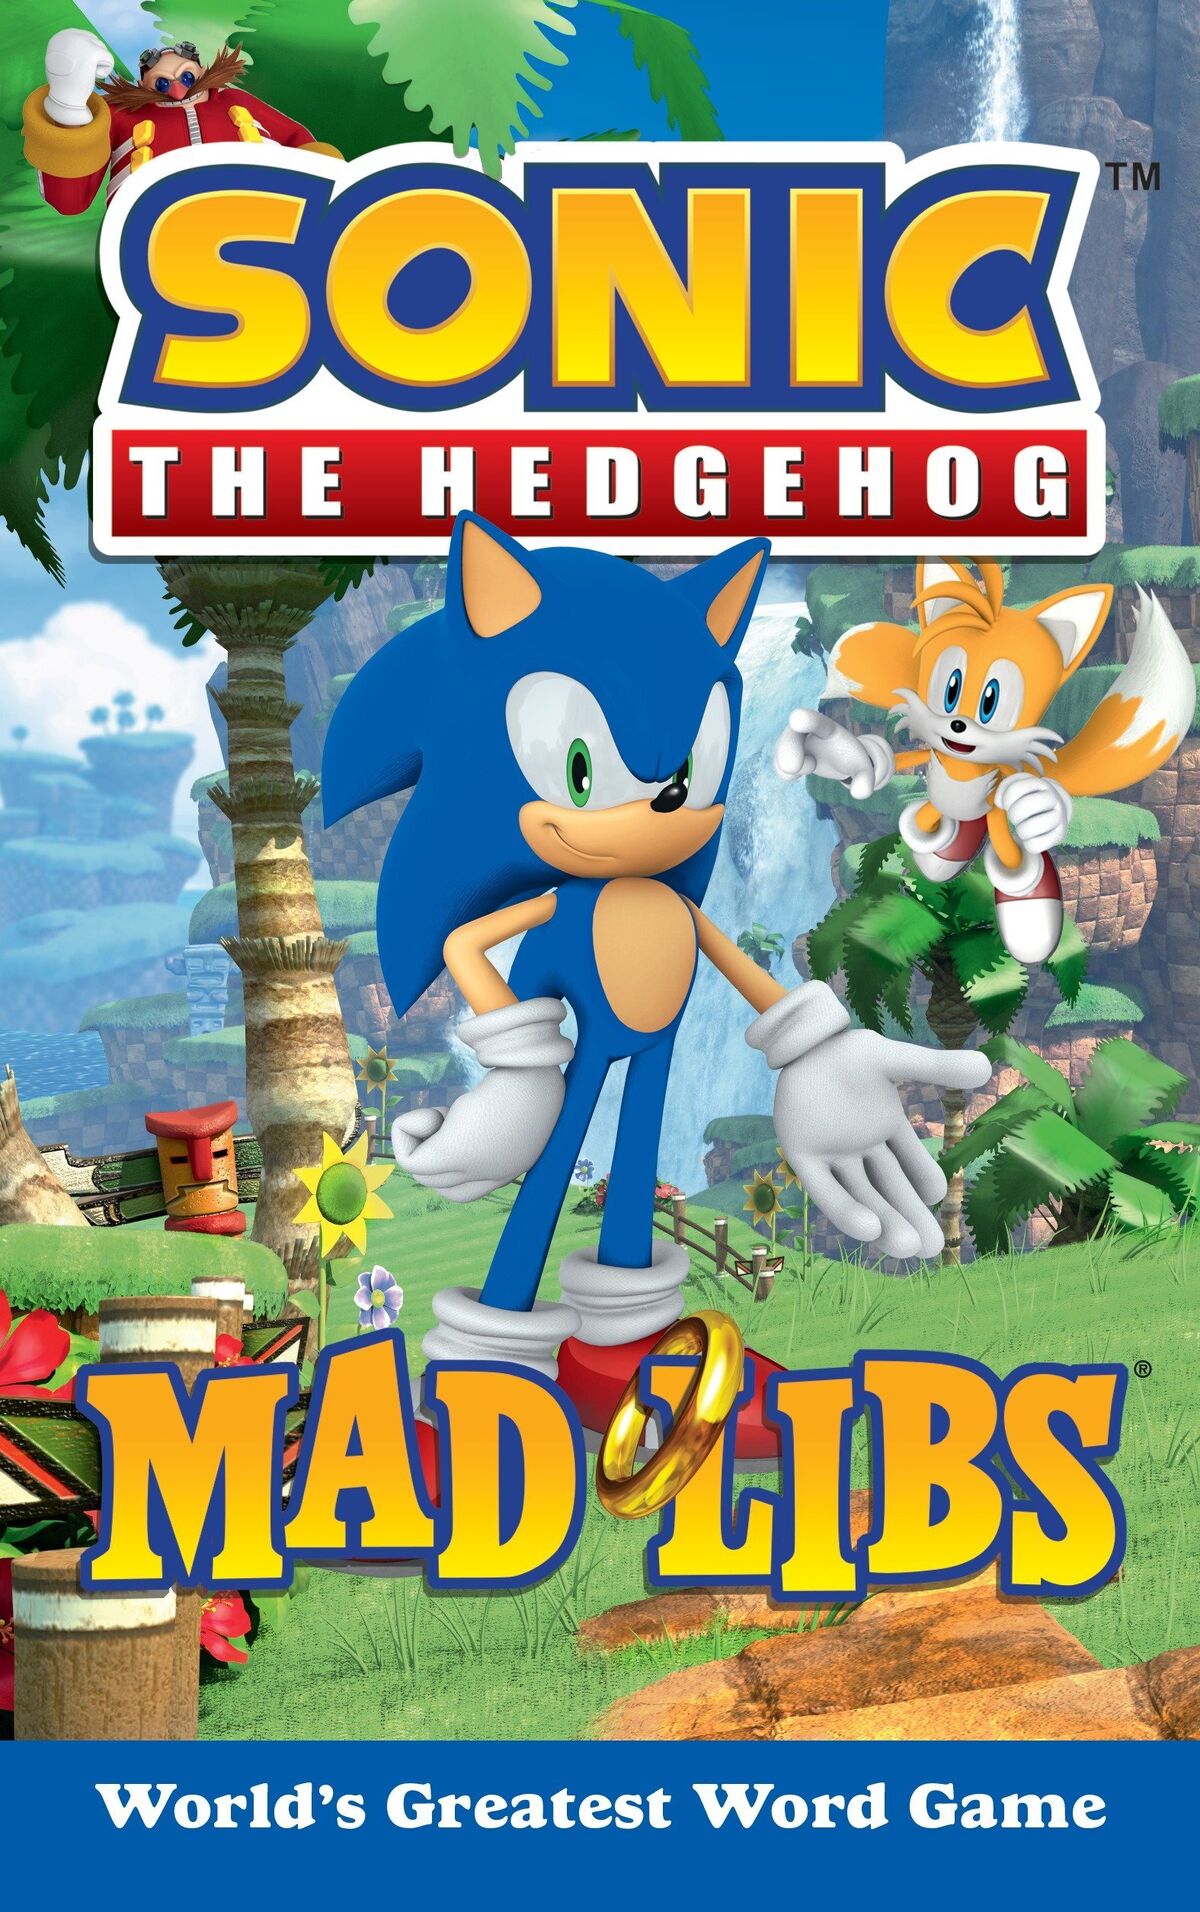 Sonic the Hedgehog: The Official Movie Mad Libs